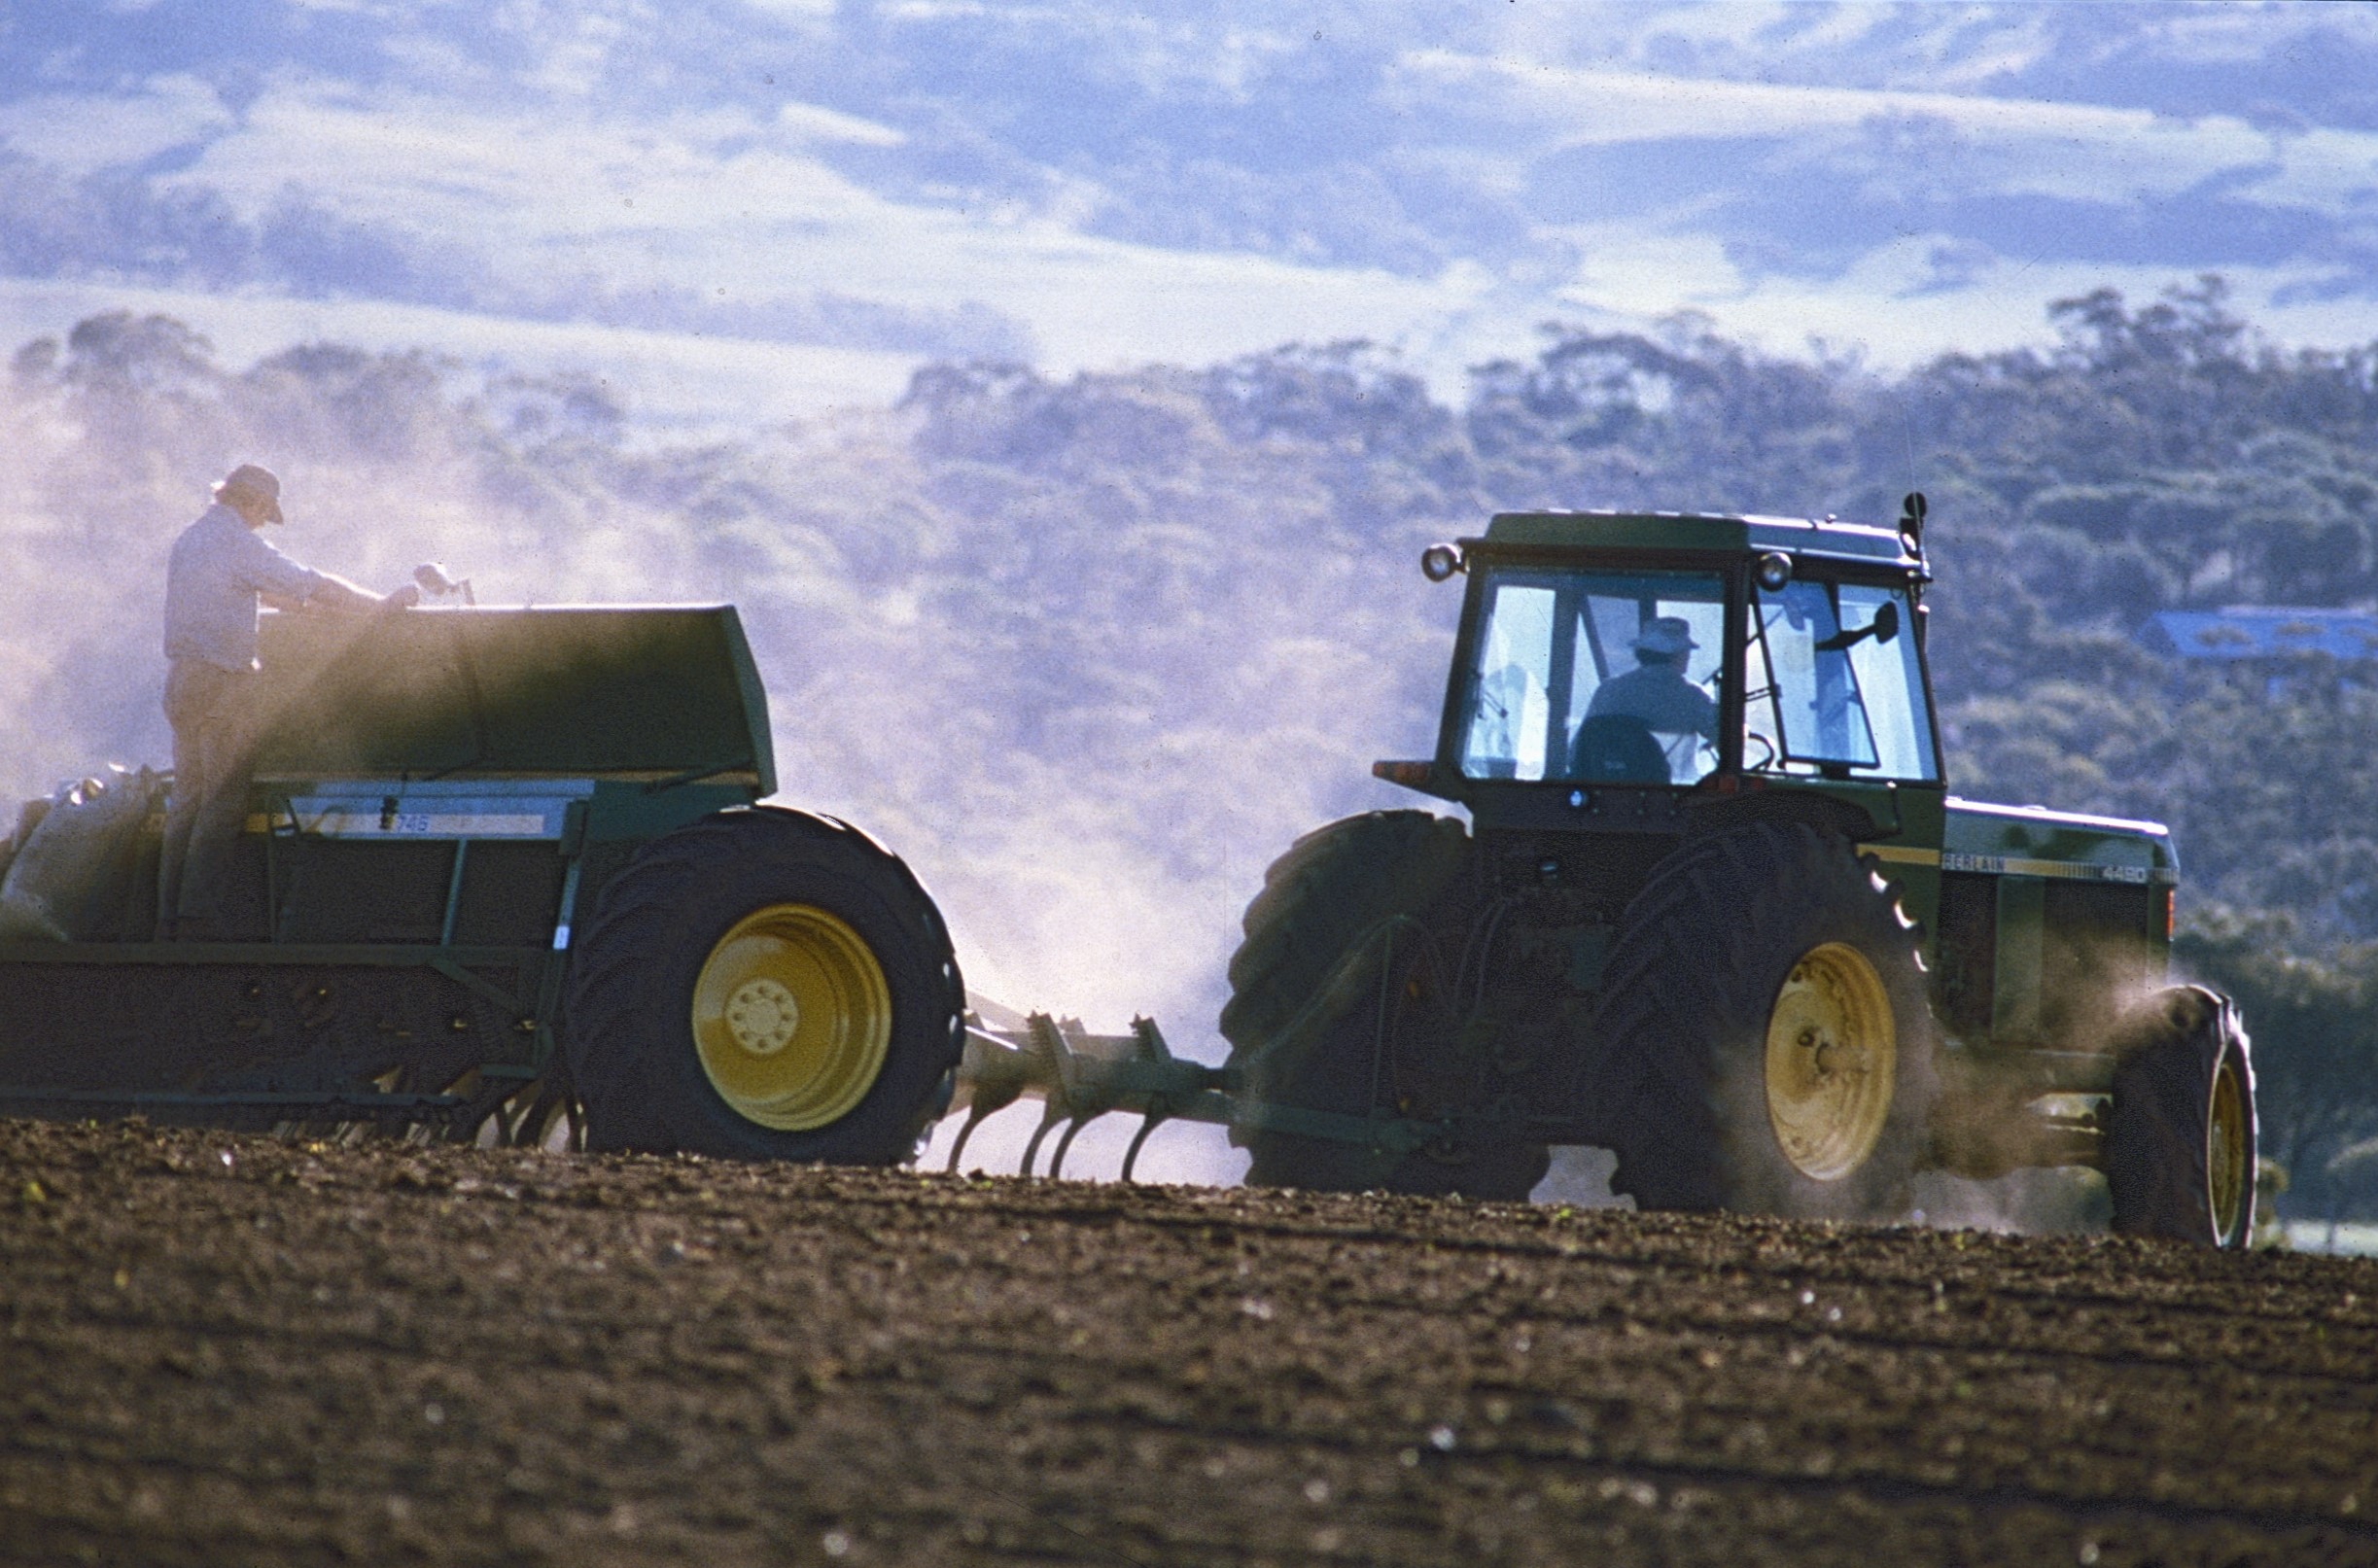 A tractor is pulling a trailer over a crop field, creating dust in the background.